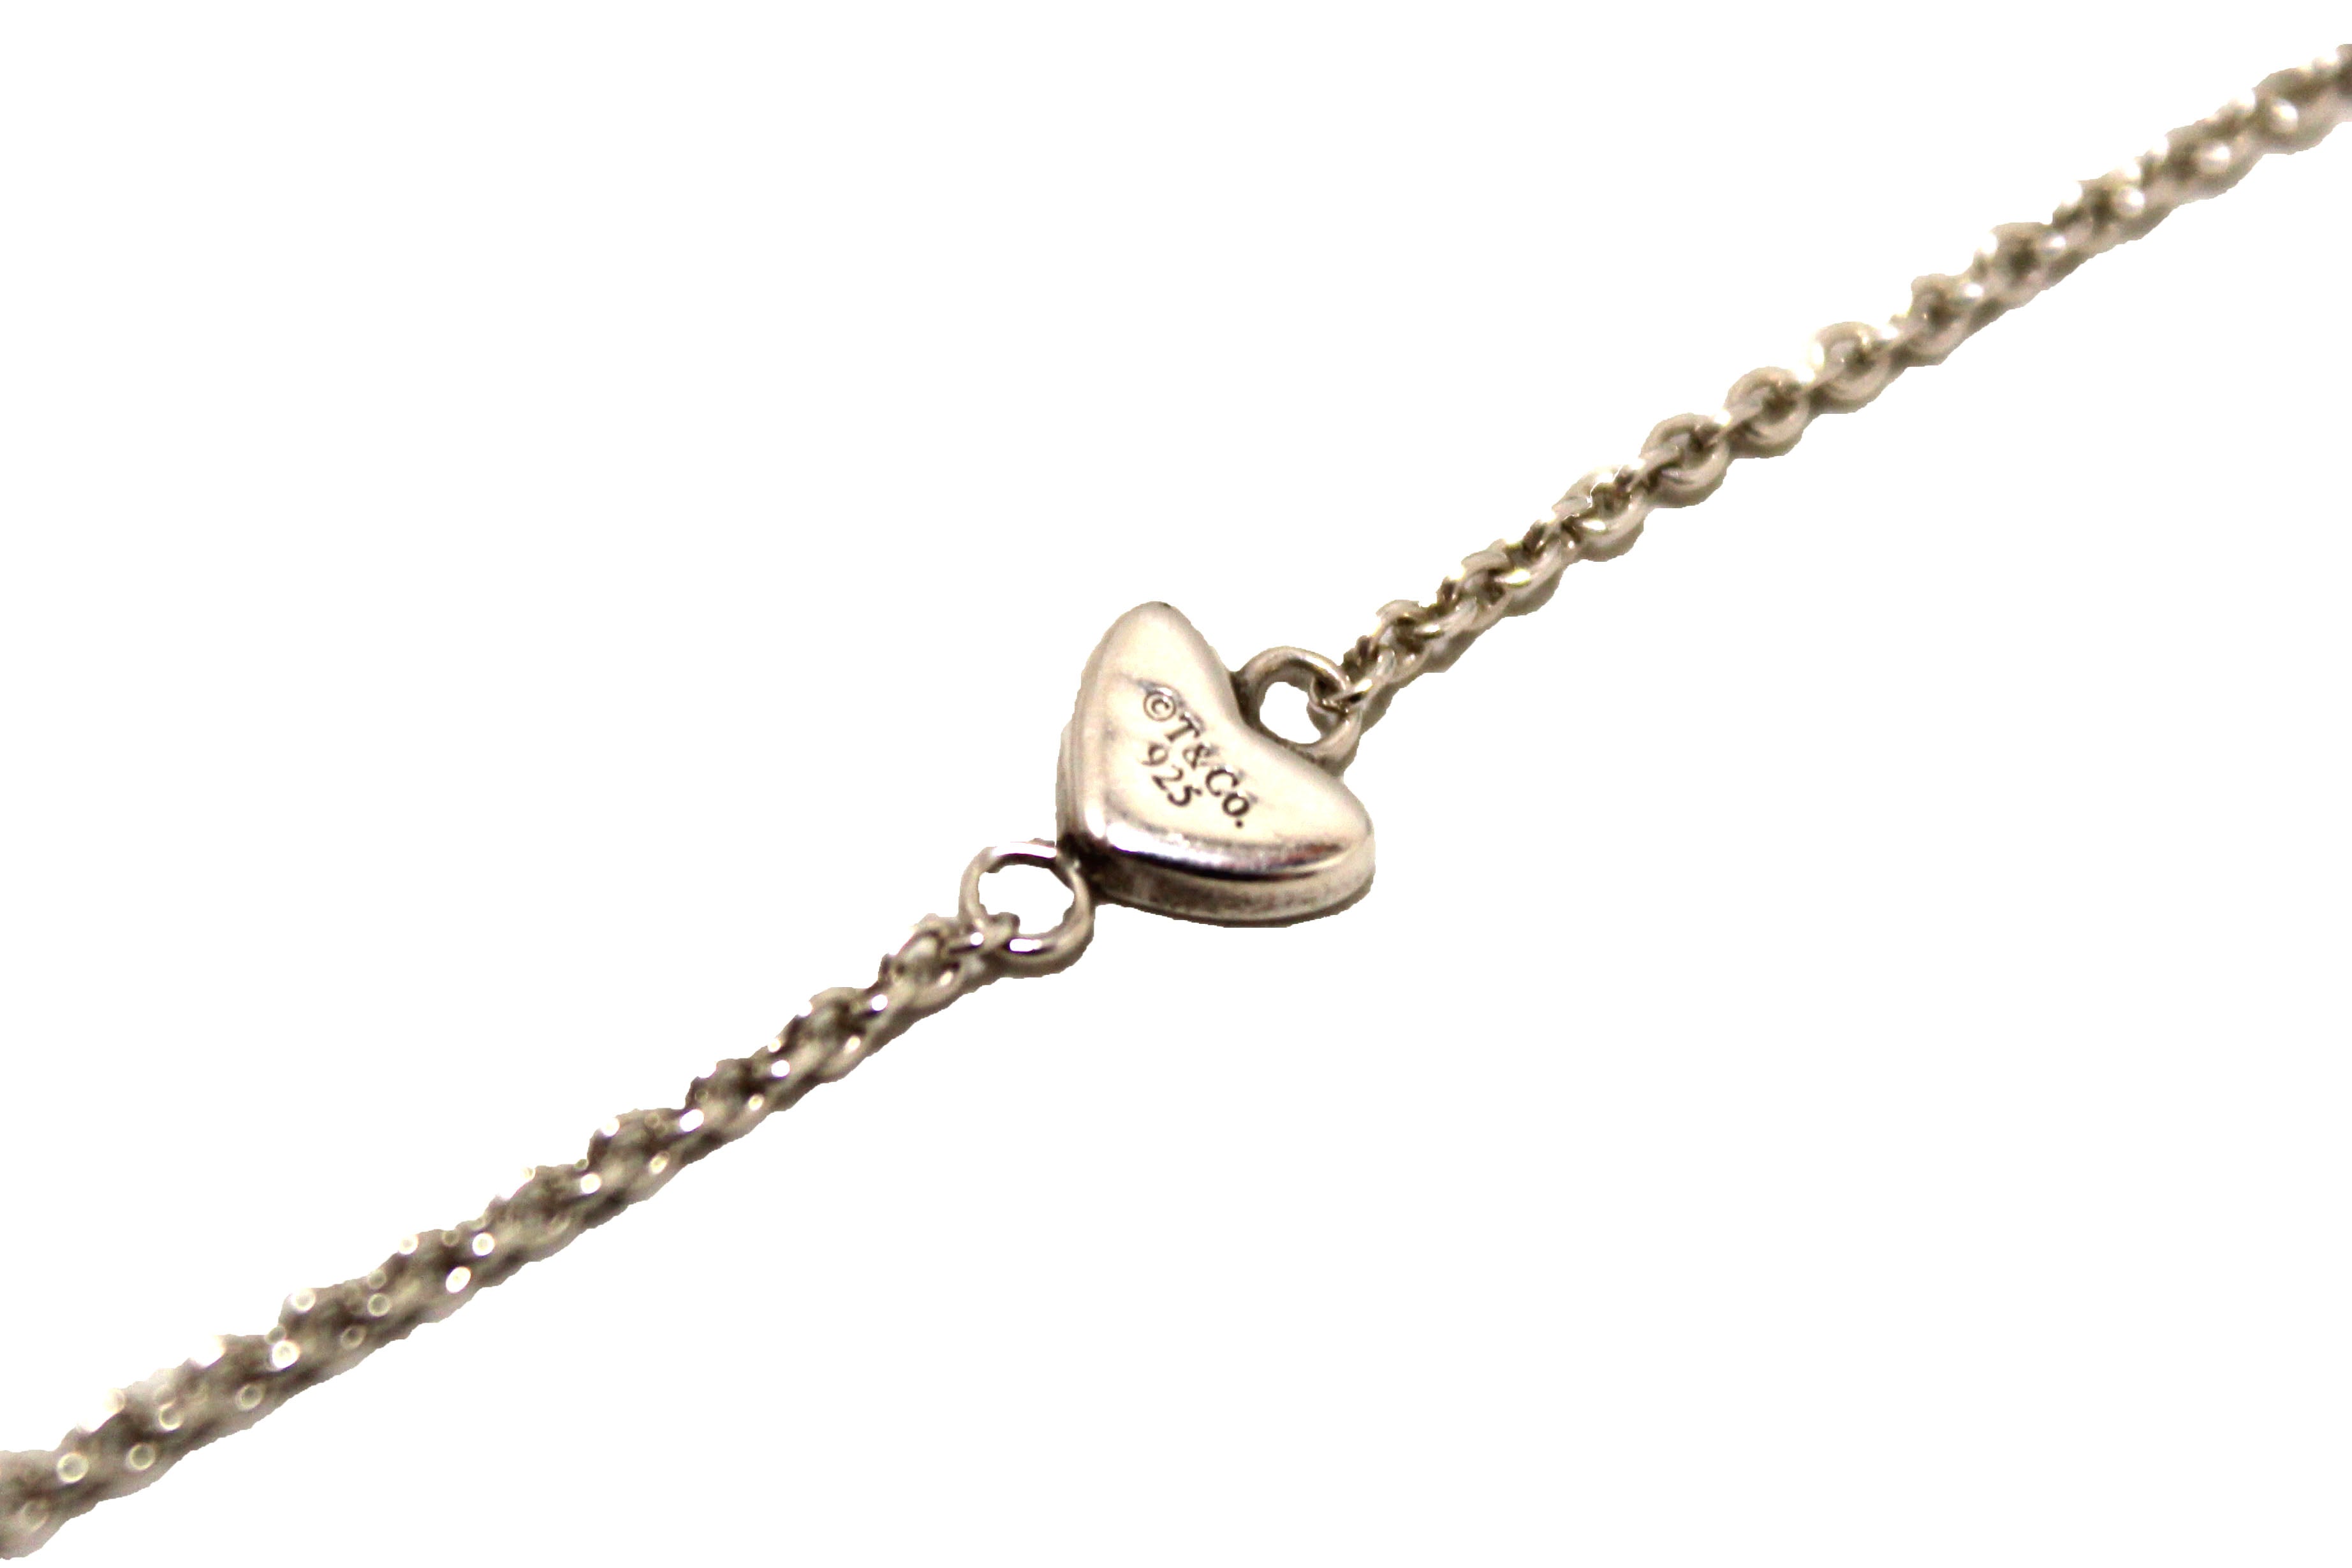 Authentic Tiffany & Co. Sterling Silver Heart Link Lariat Necklace